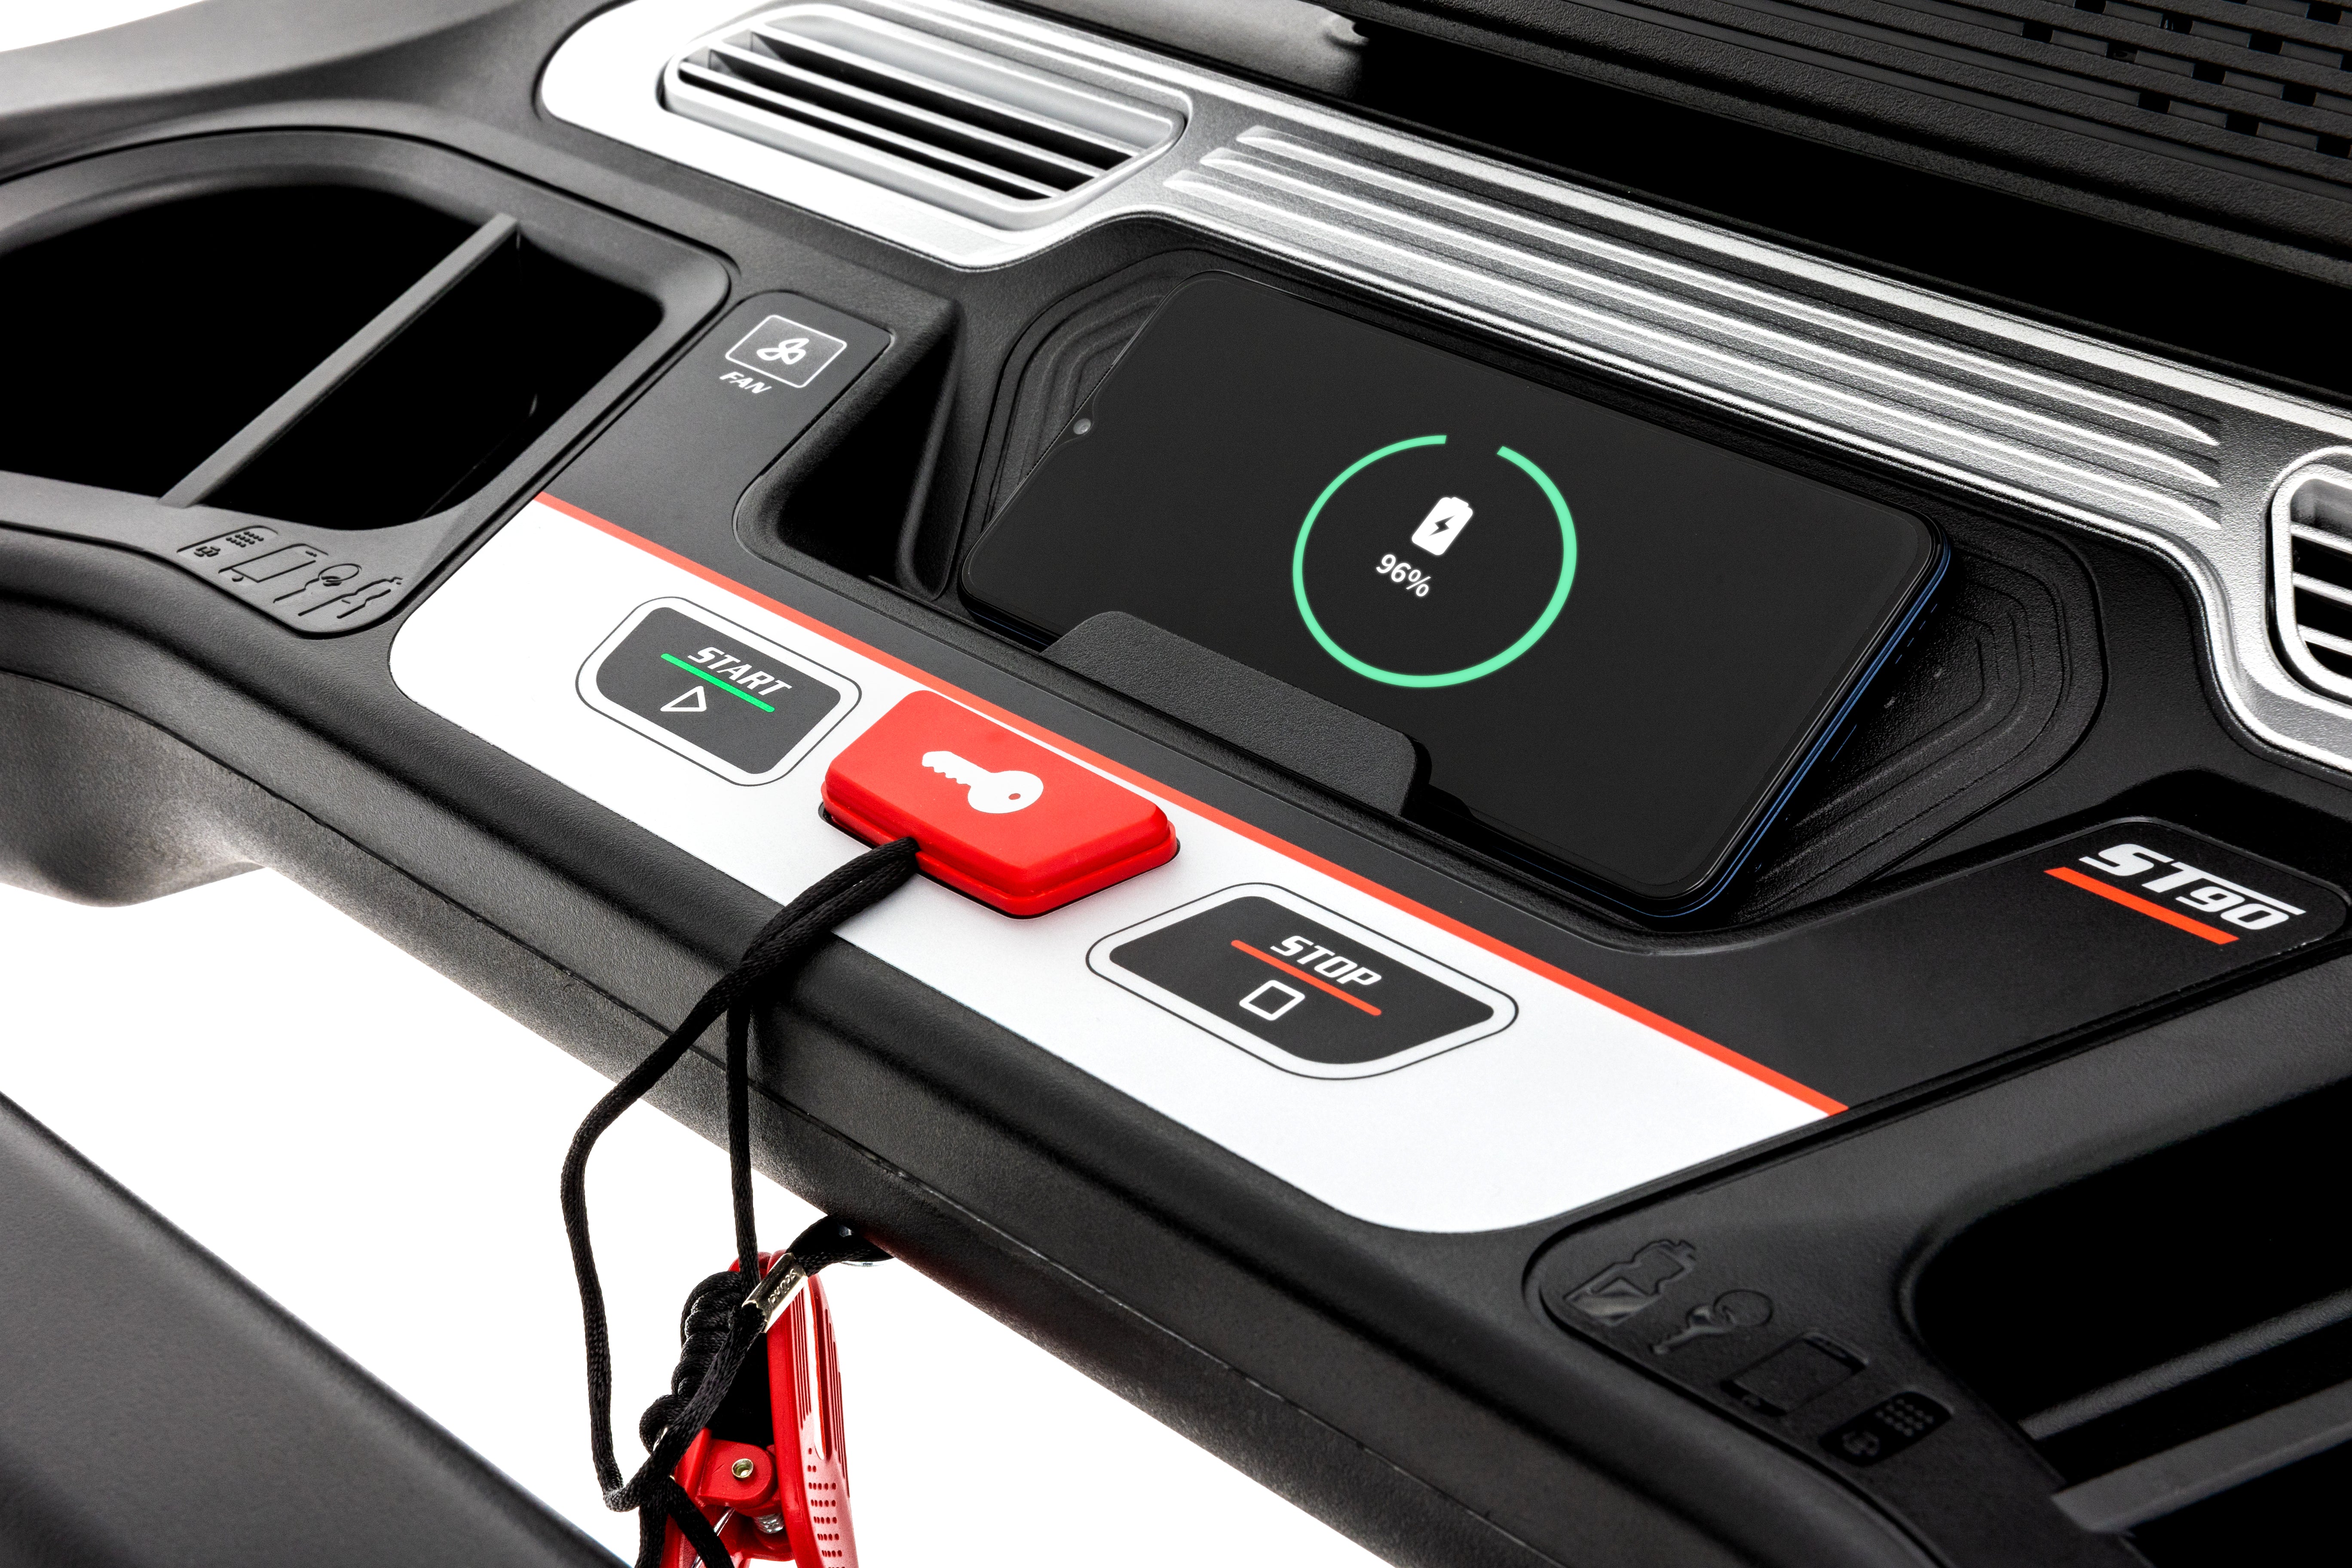 Close-up view of the Sole ST90 treadmill's central console, showing a digital display with a battery charging indicator, start and stop buttons, safety key attached with a cord, and other tactile controls against a black and silver background.